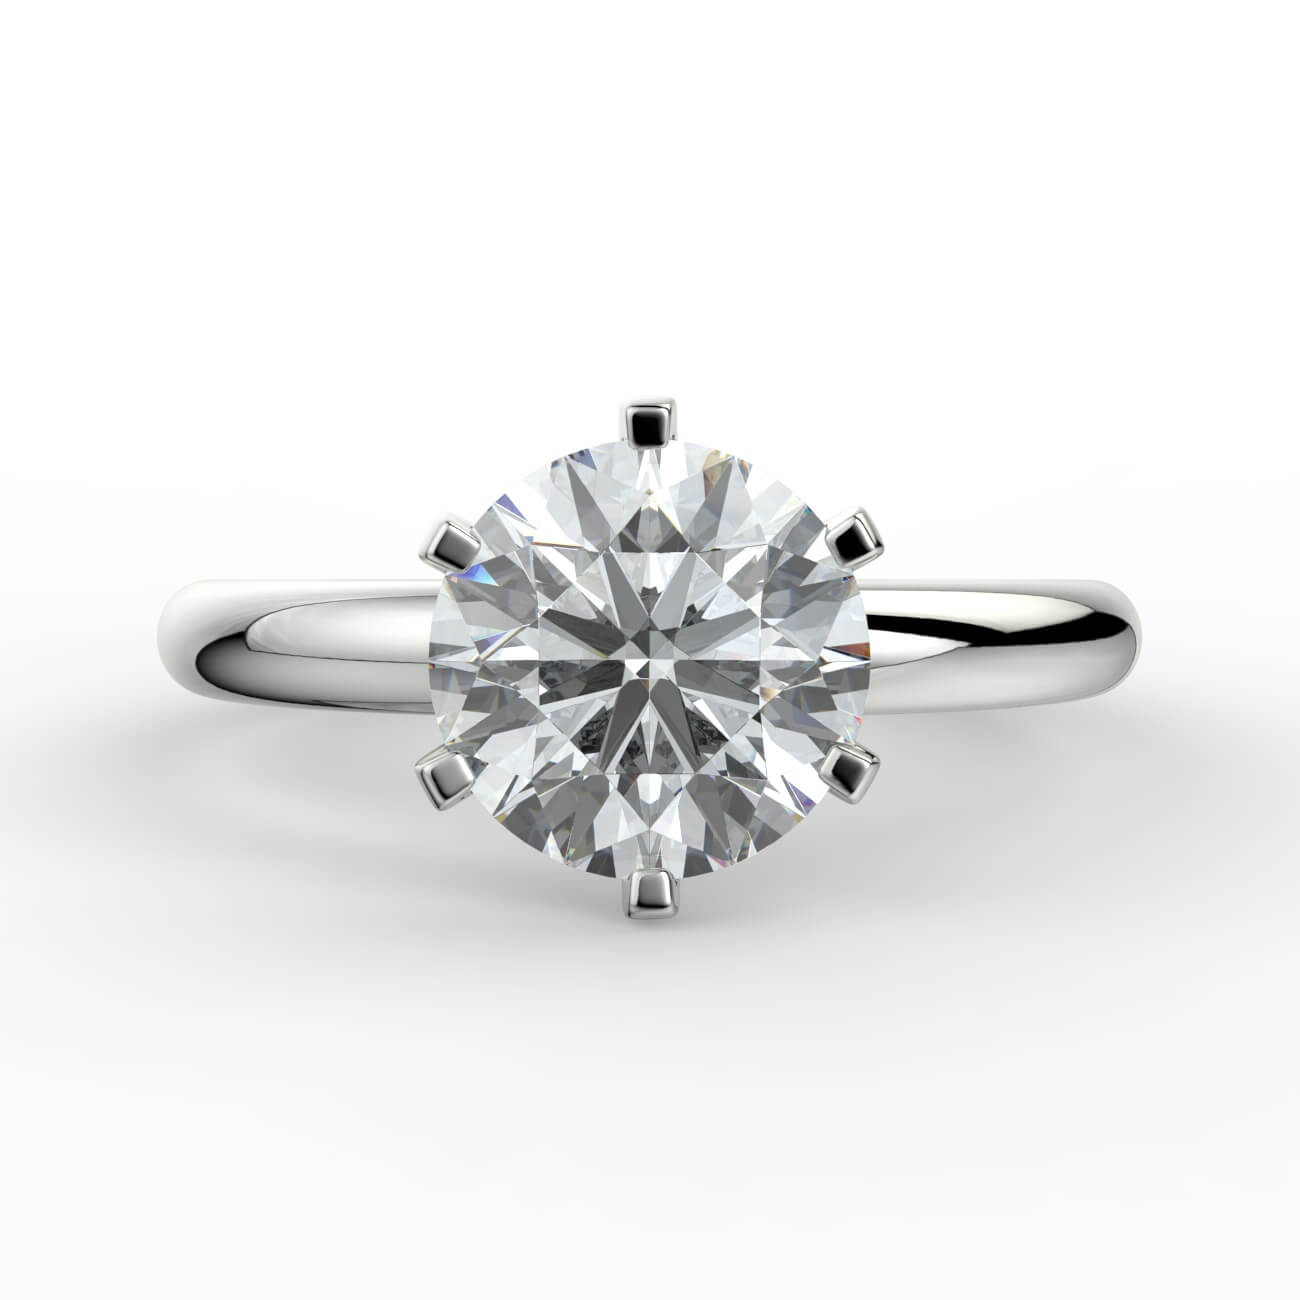 Comfort fit 6 claw solitaire diamond ring in white gold – Australian Diamond Network